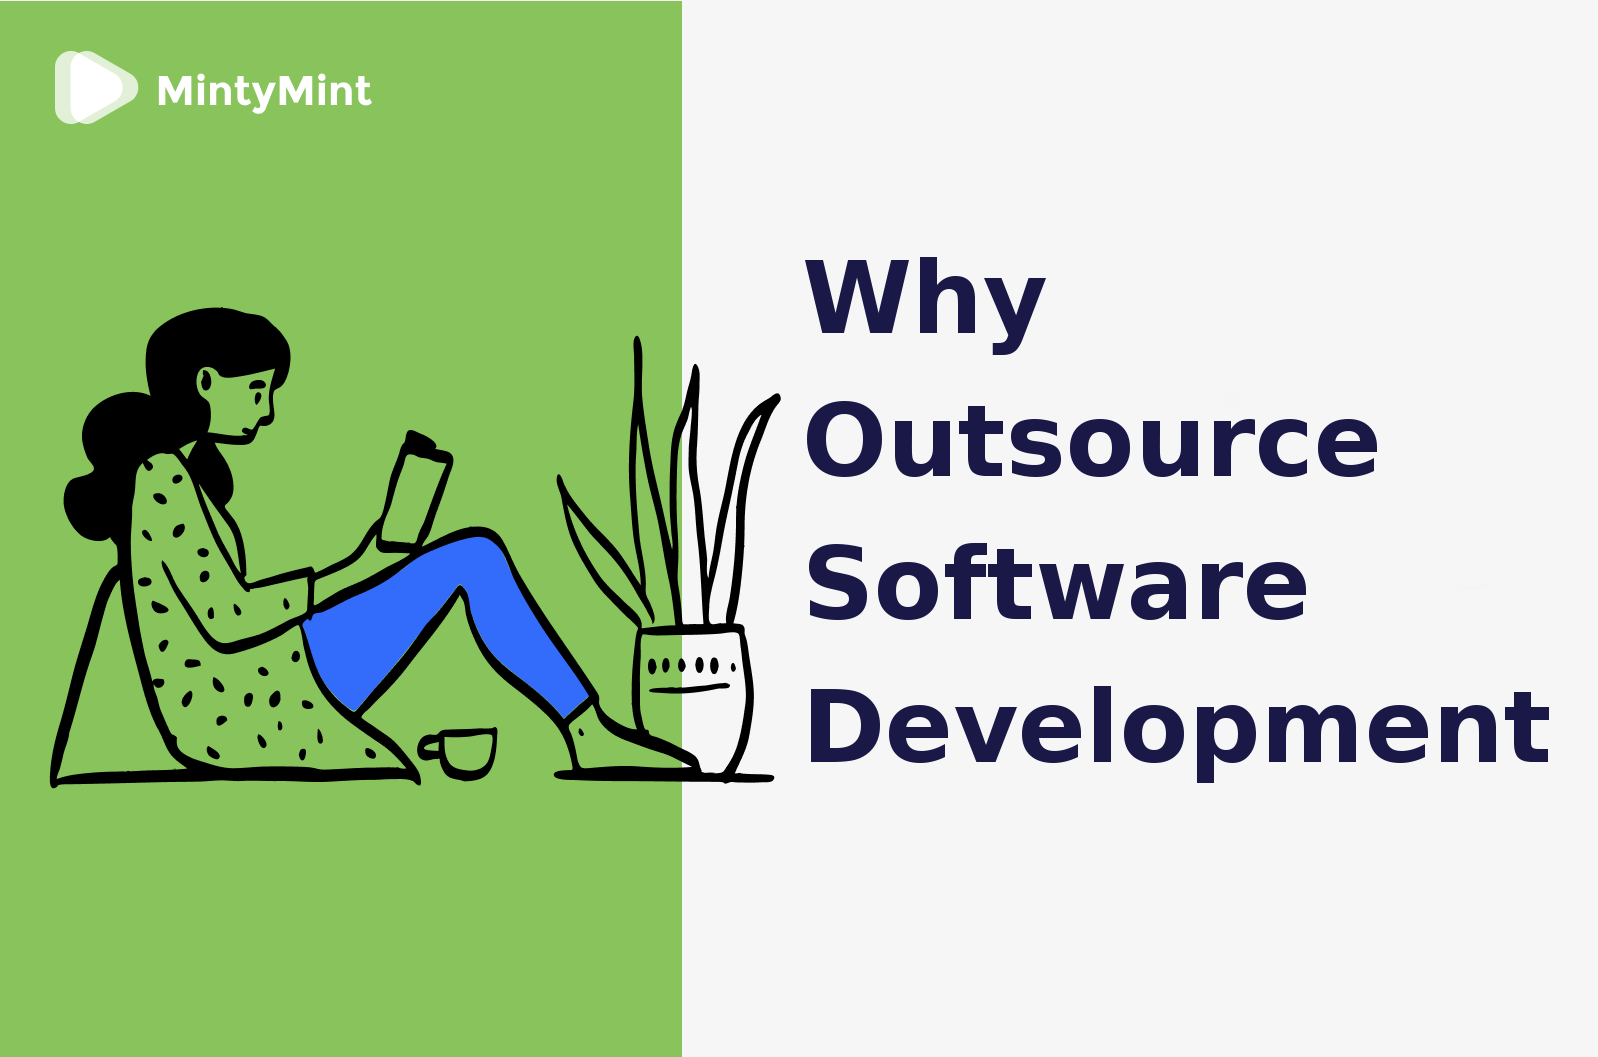 Why Outsource Software Development